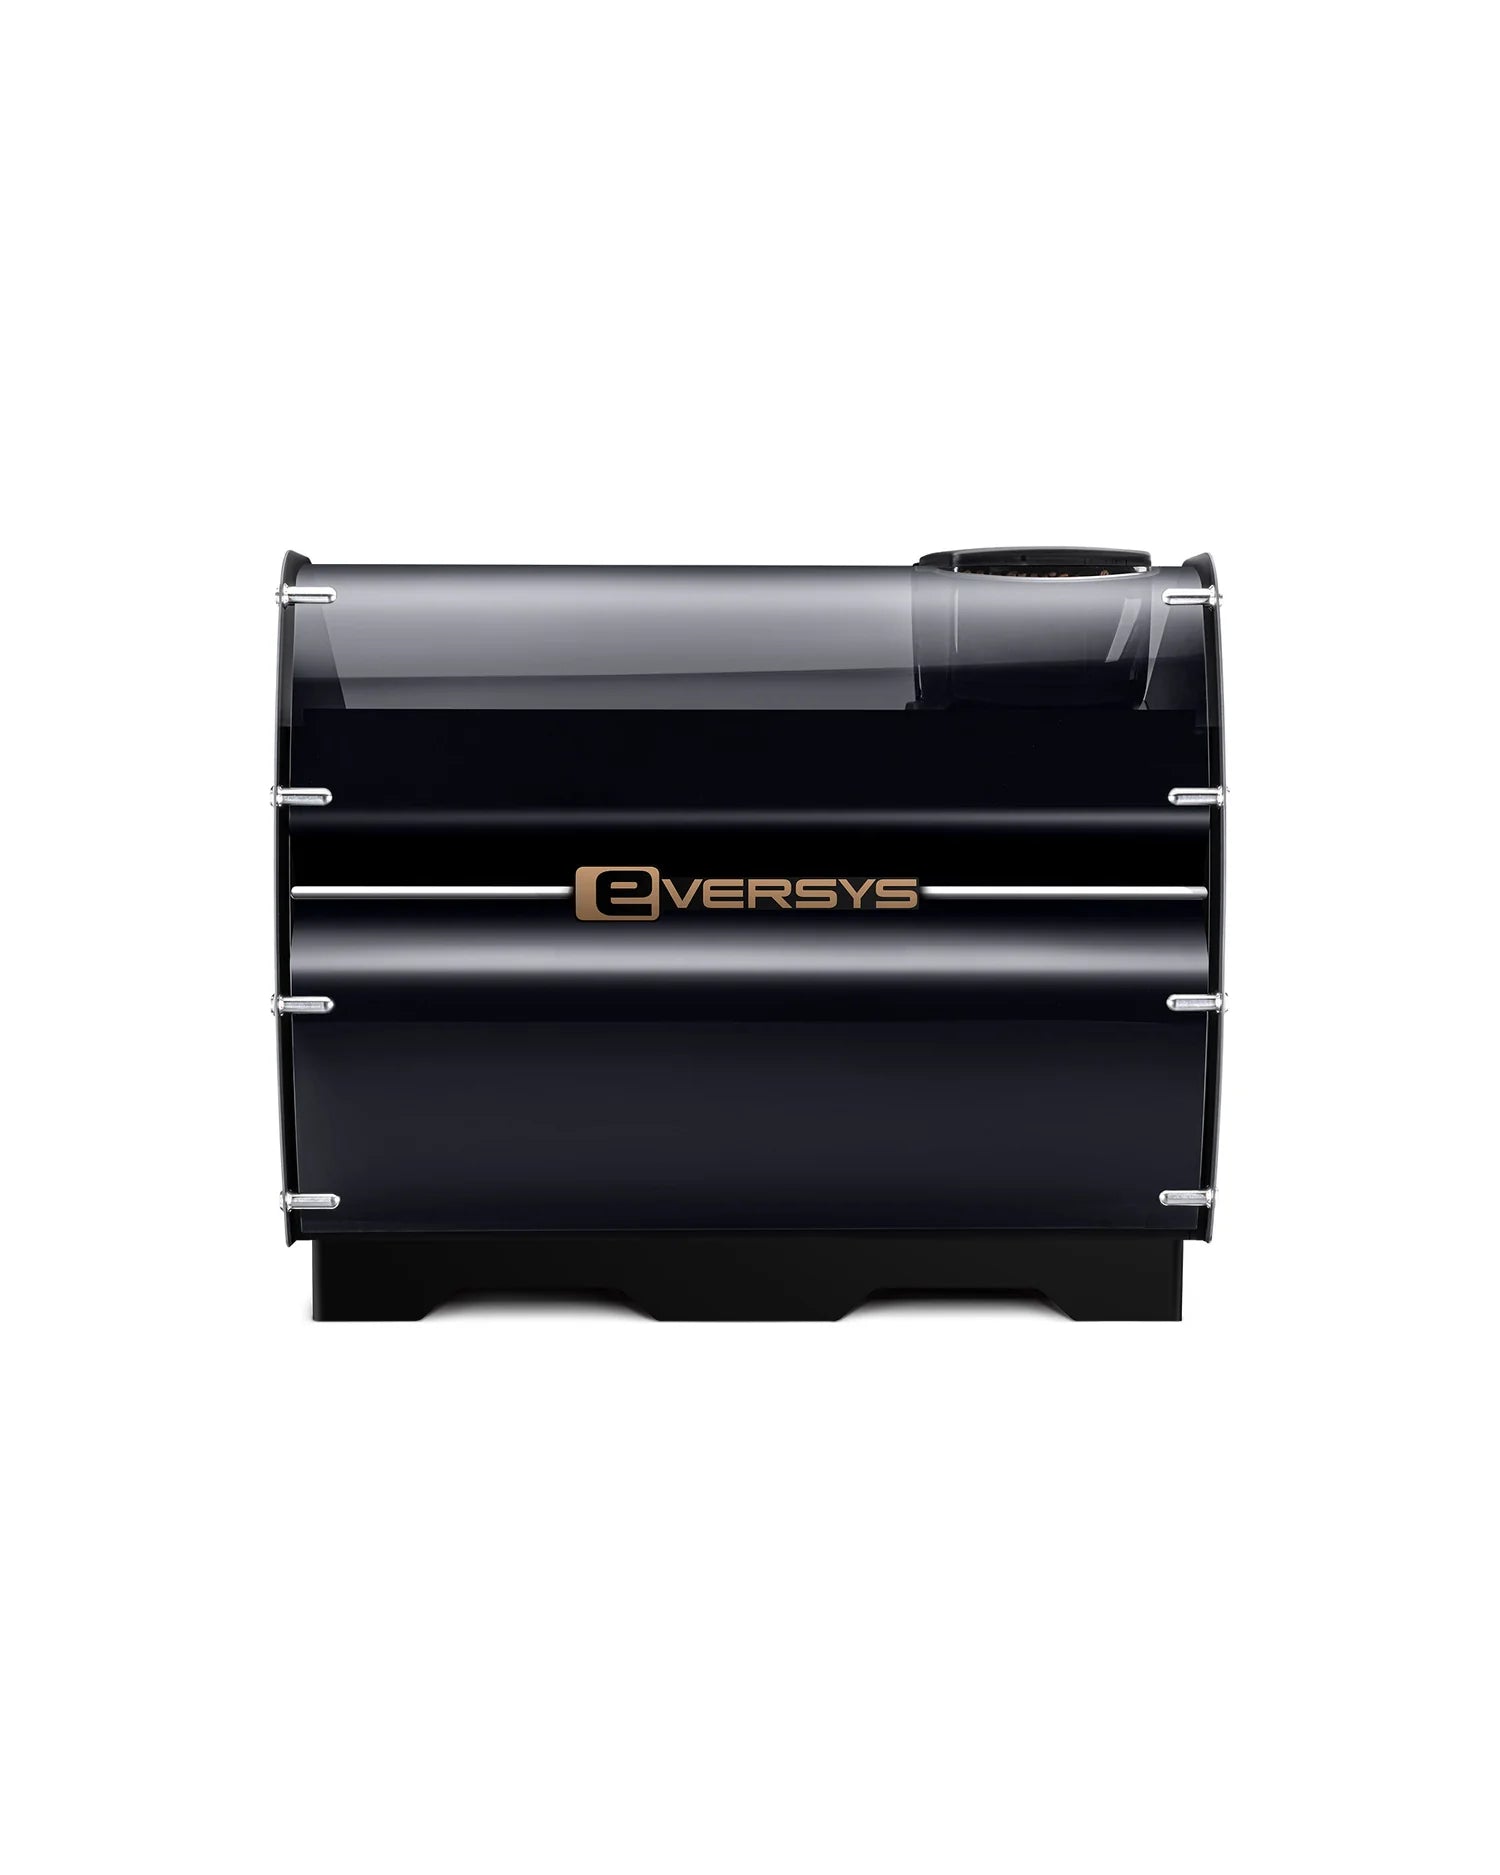 Eversys - Enigma E'4MS X-WIDE/ST